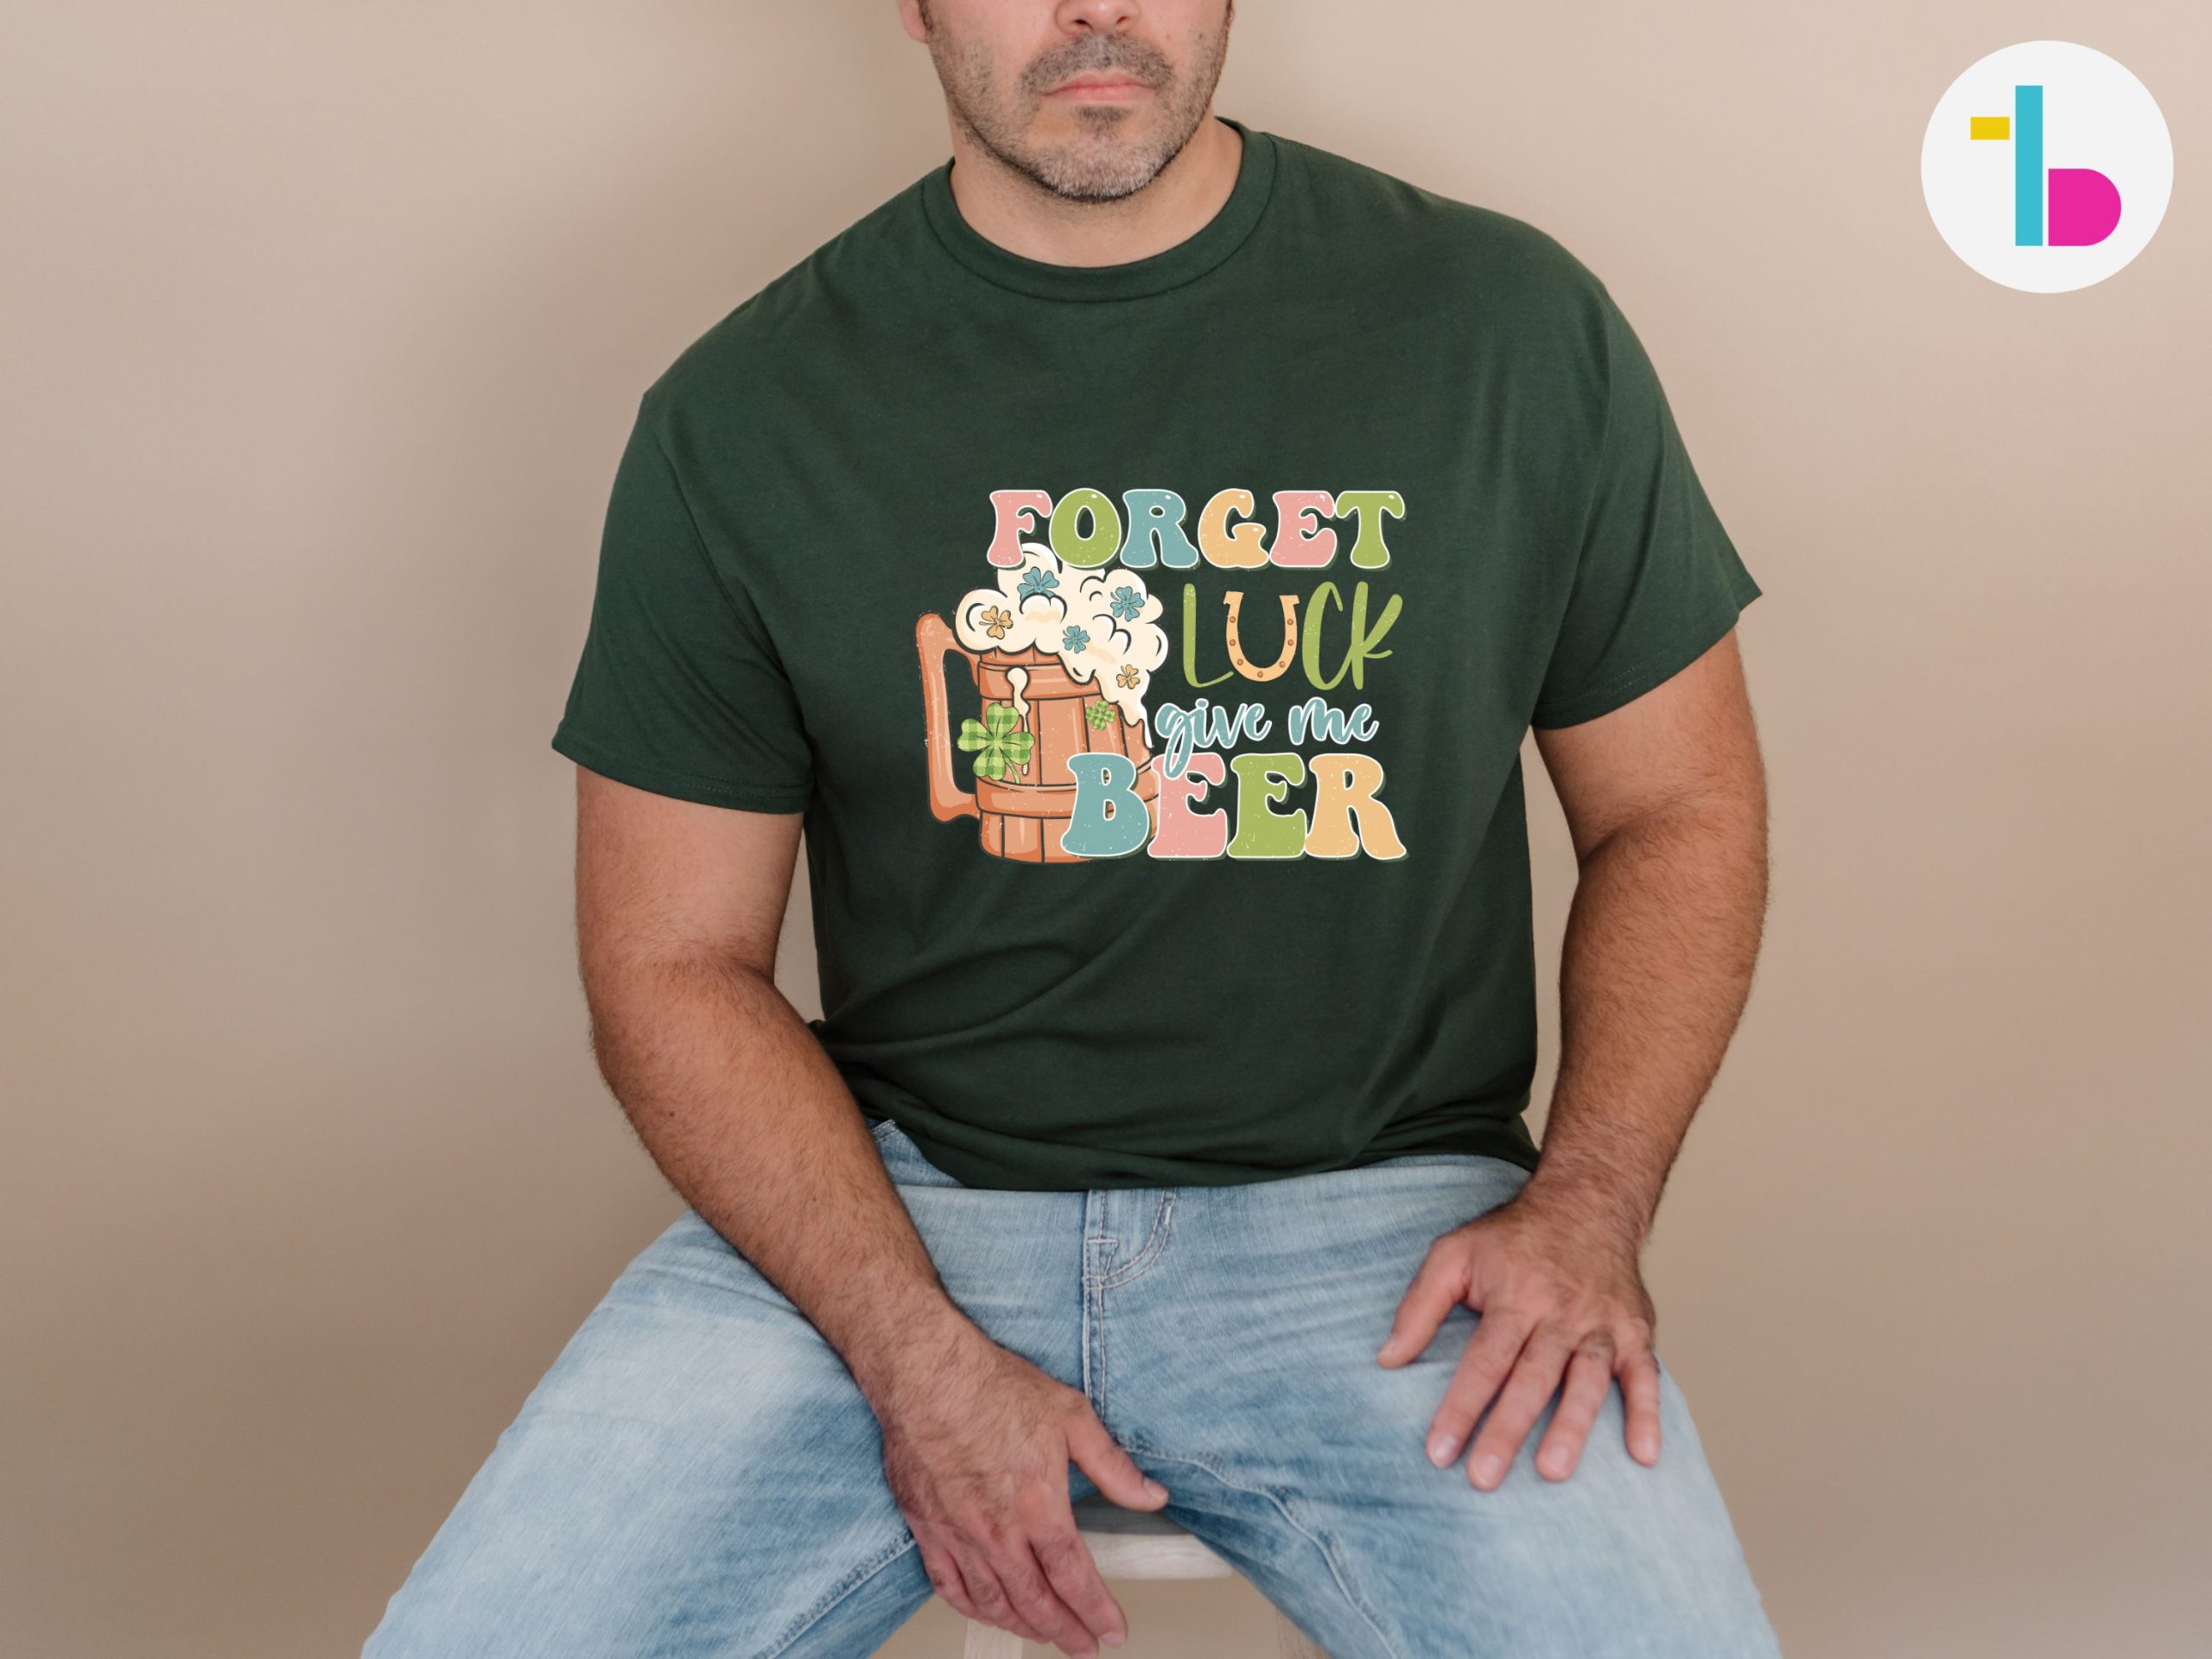 Forget luck give me beer shirt, Funny retro Irish shirt, Beer lover gift